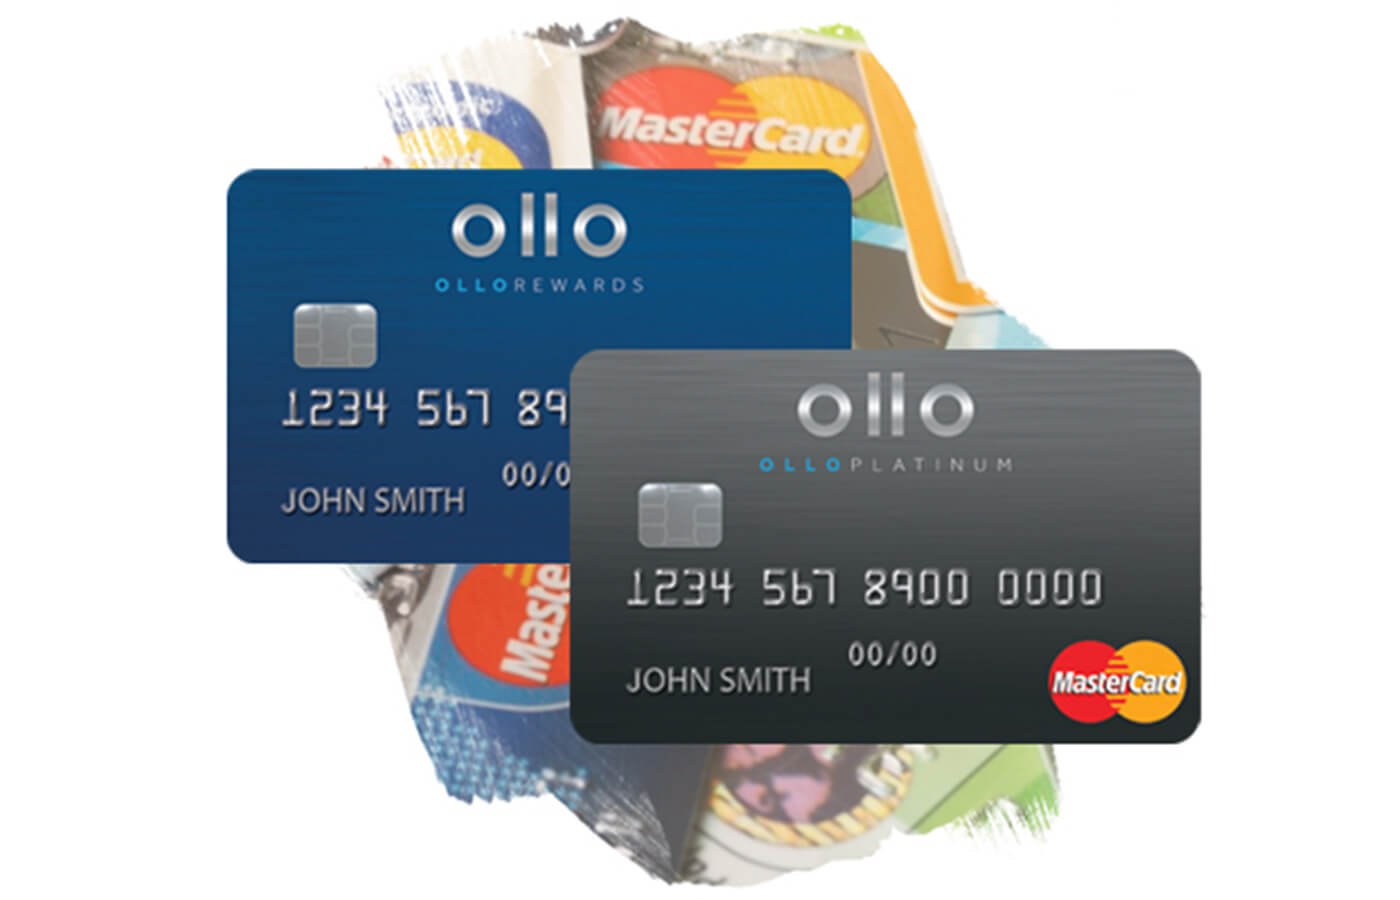 Ollo Cards: A Credit Card for Those With Lower Credit Scores